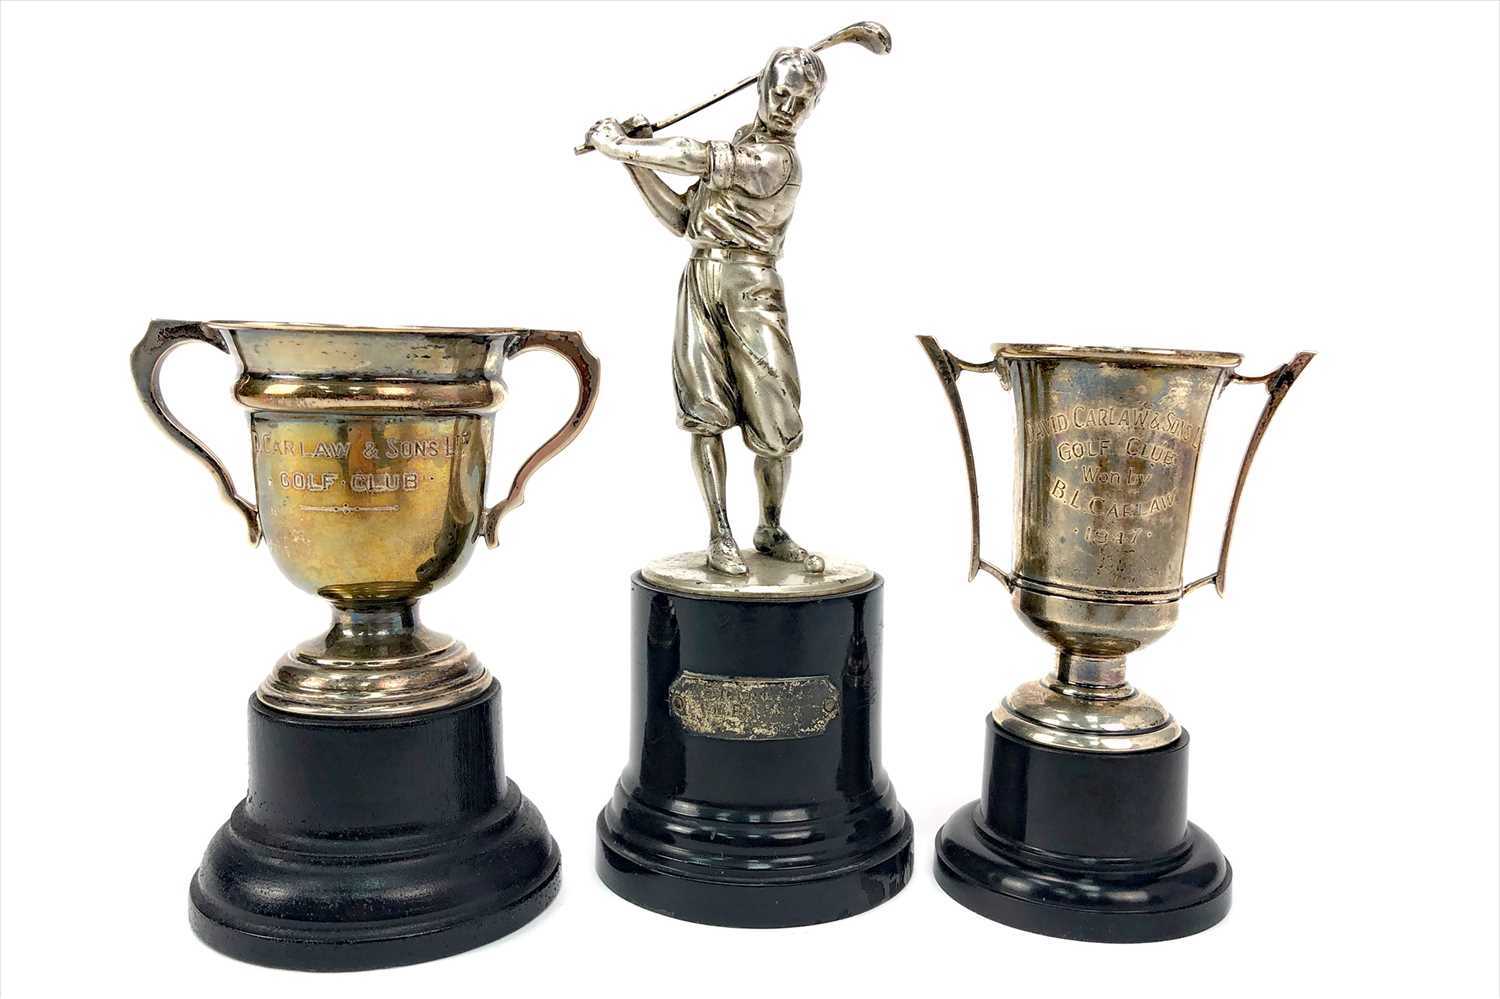 Lot 1722 - GOLFING INTEREST - THREE EARLY 20TH CENTURY GOLFING TROPHIES